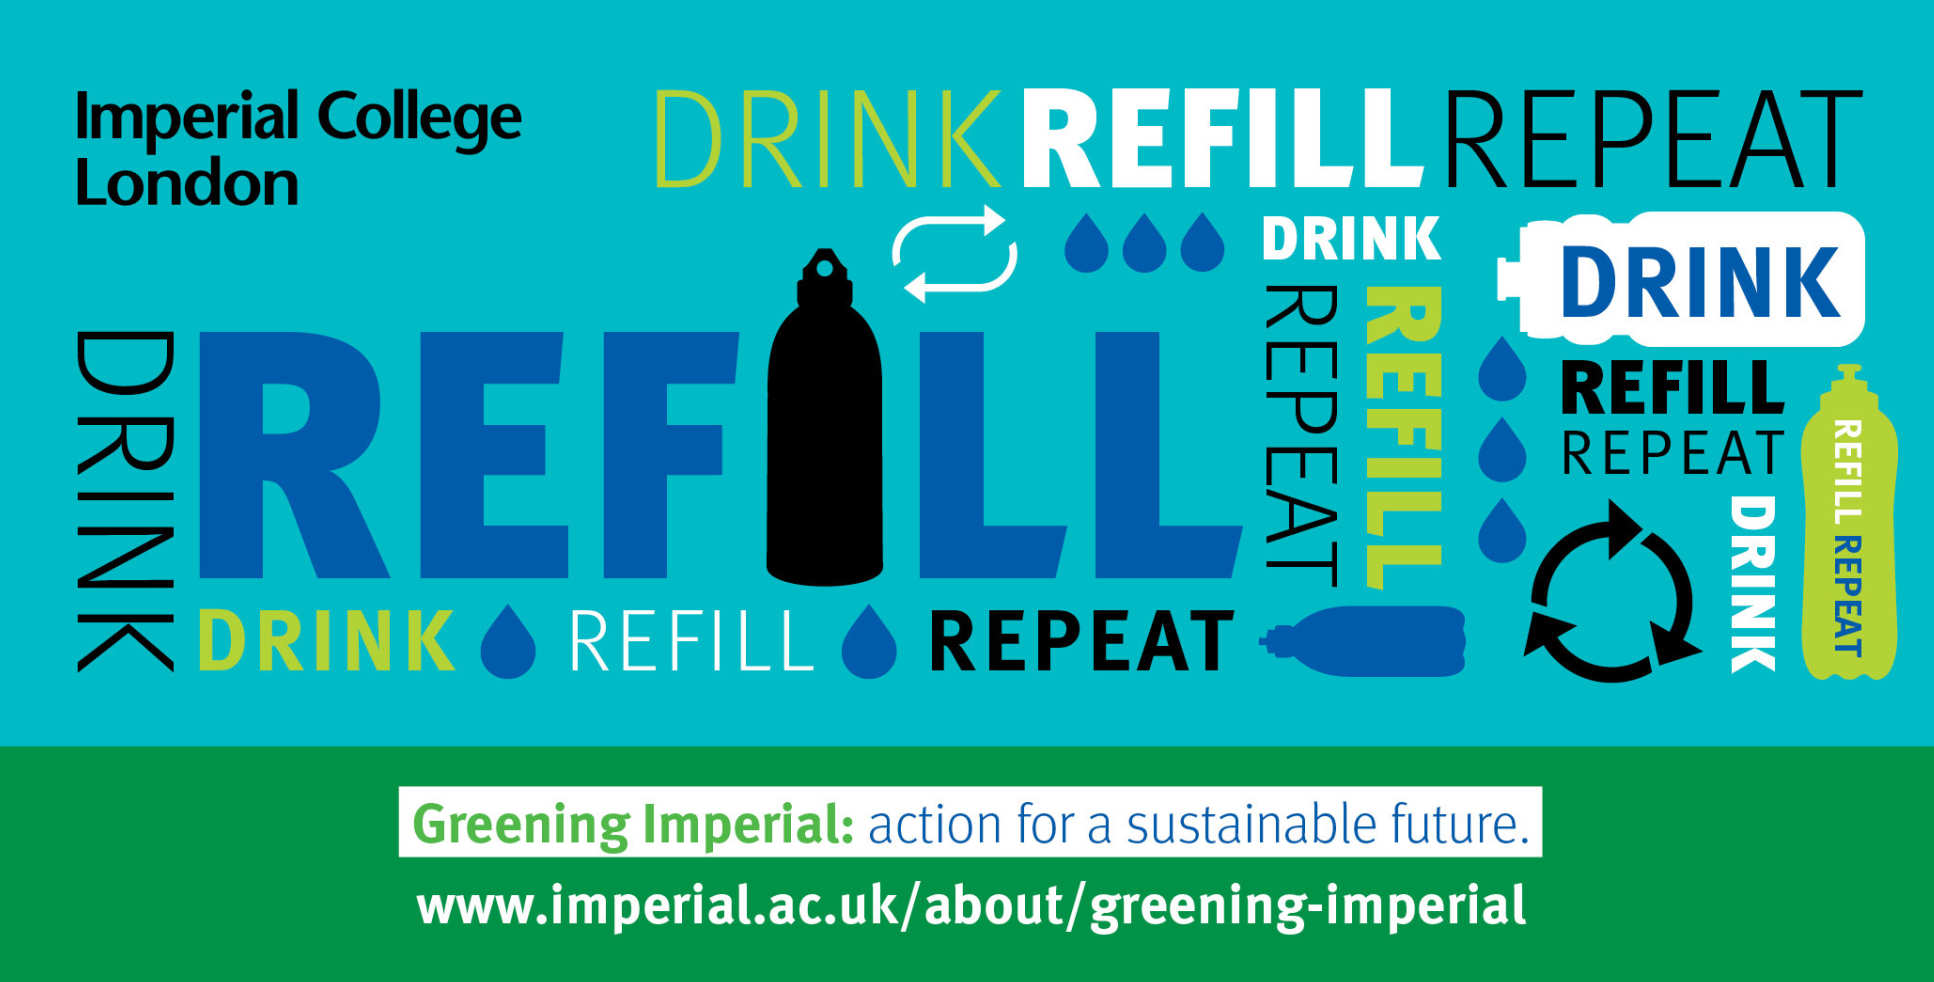 Graphic with the words "Drink Refill Repeat"